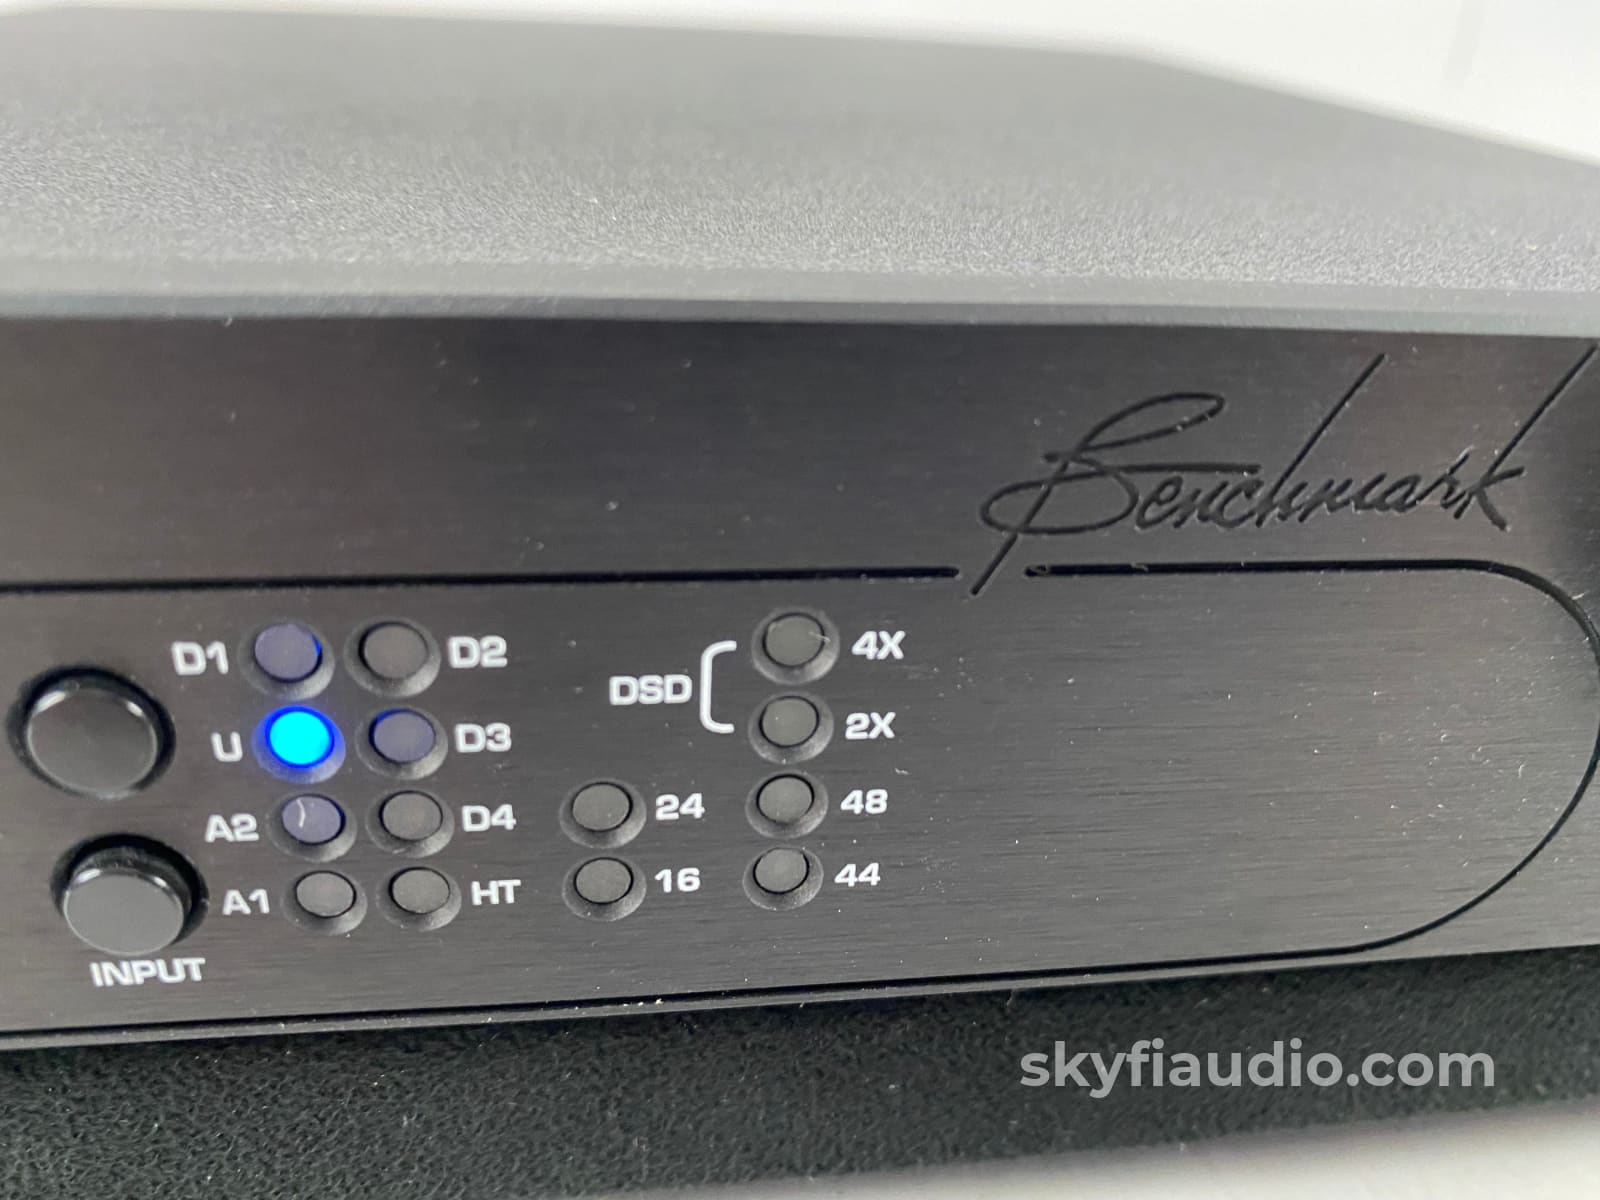 Benchmark Dac3 L - Dsd Reference Quad-Balanced 32-Bit Dac And Preamp With Remote Cd + Digital